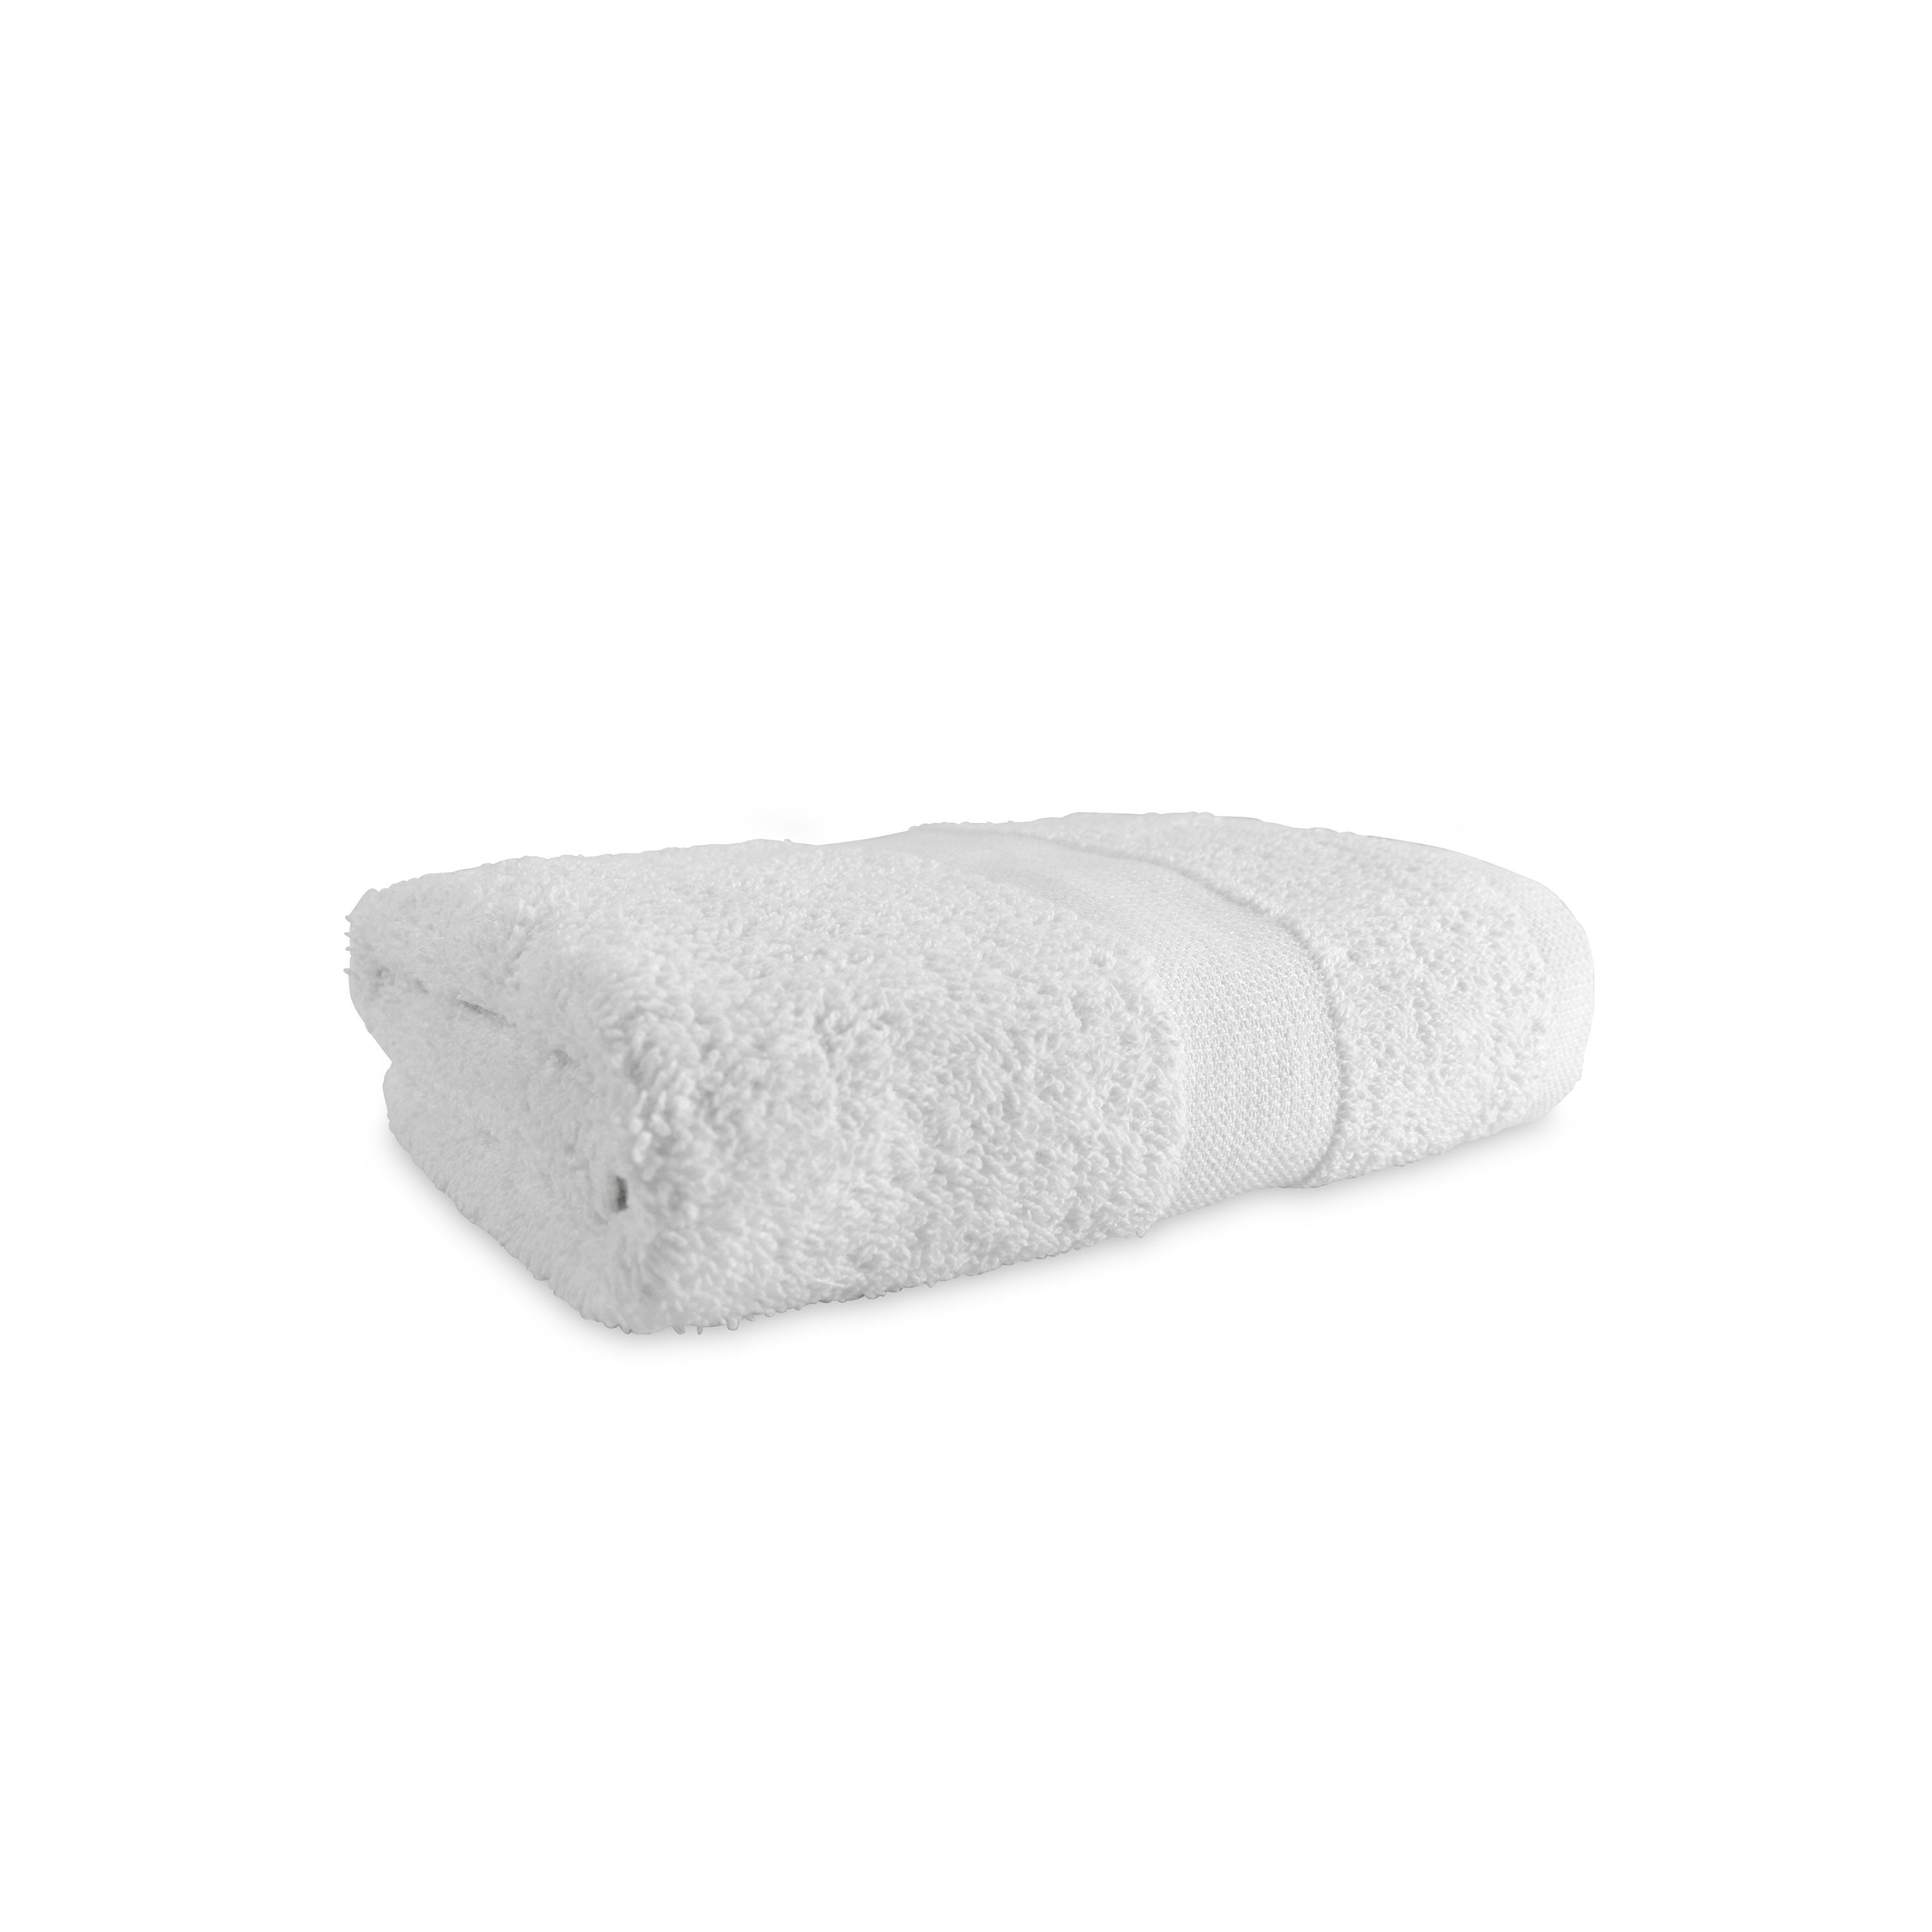 Admiral Hospitality Hand Towels 12-Pack 16x27 or 16x30 in., White Blended Cotton, Size: 16 x 30